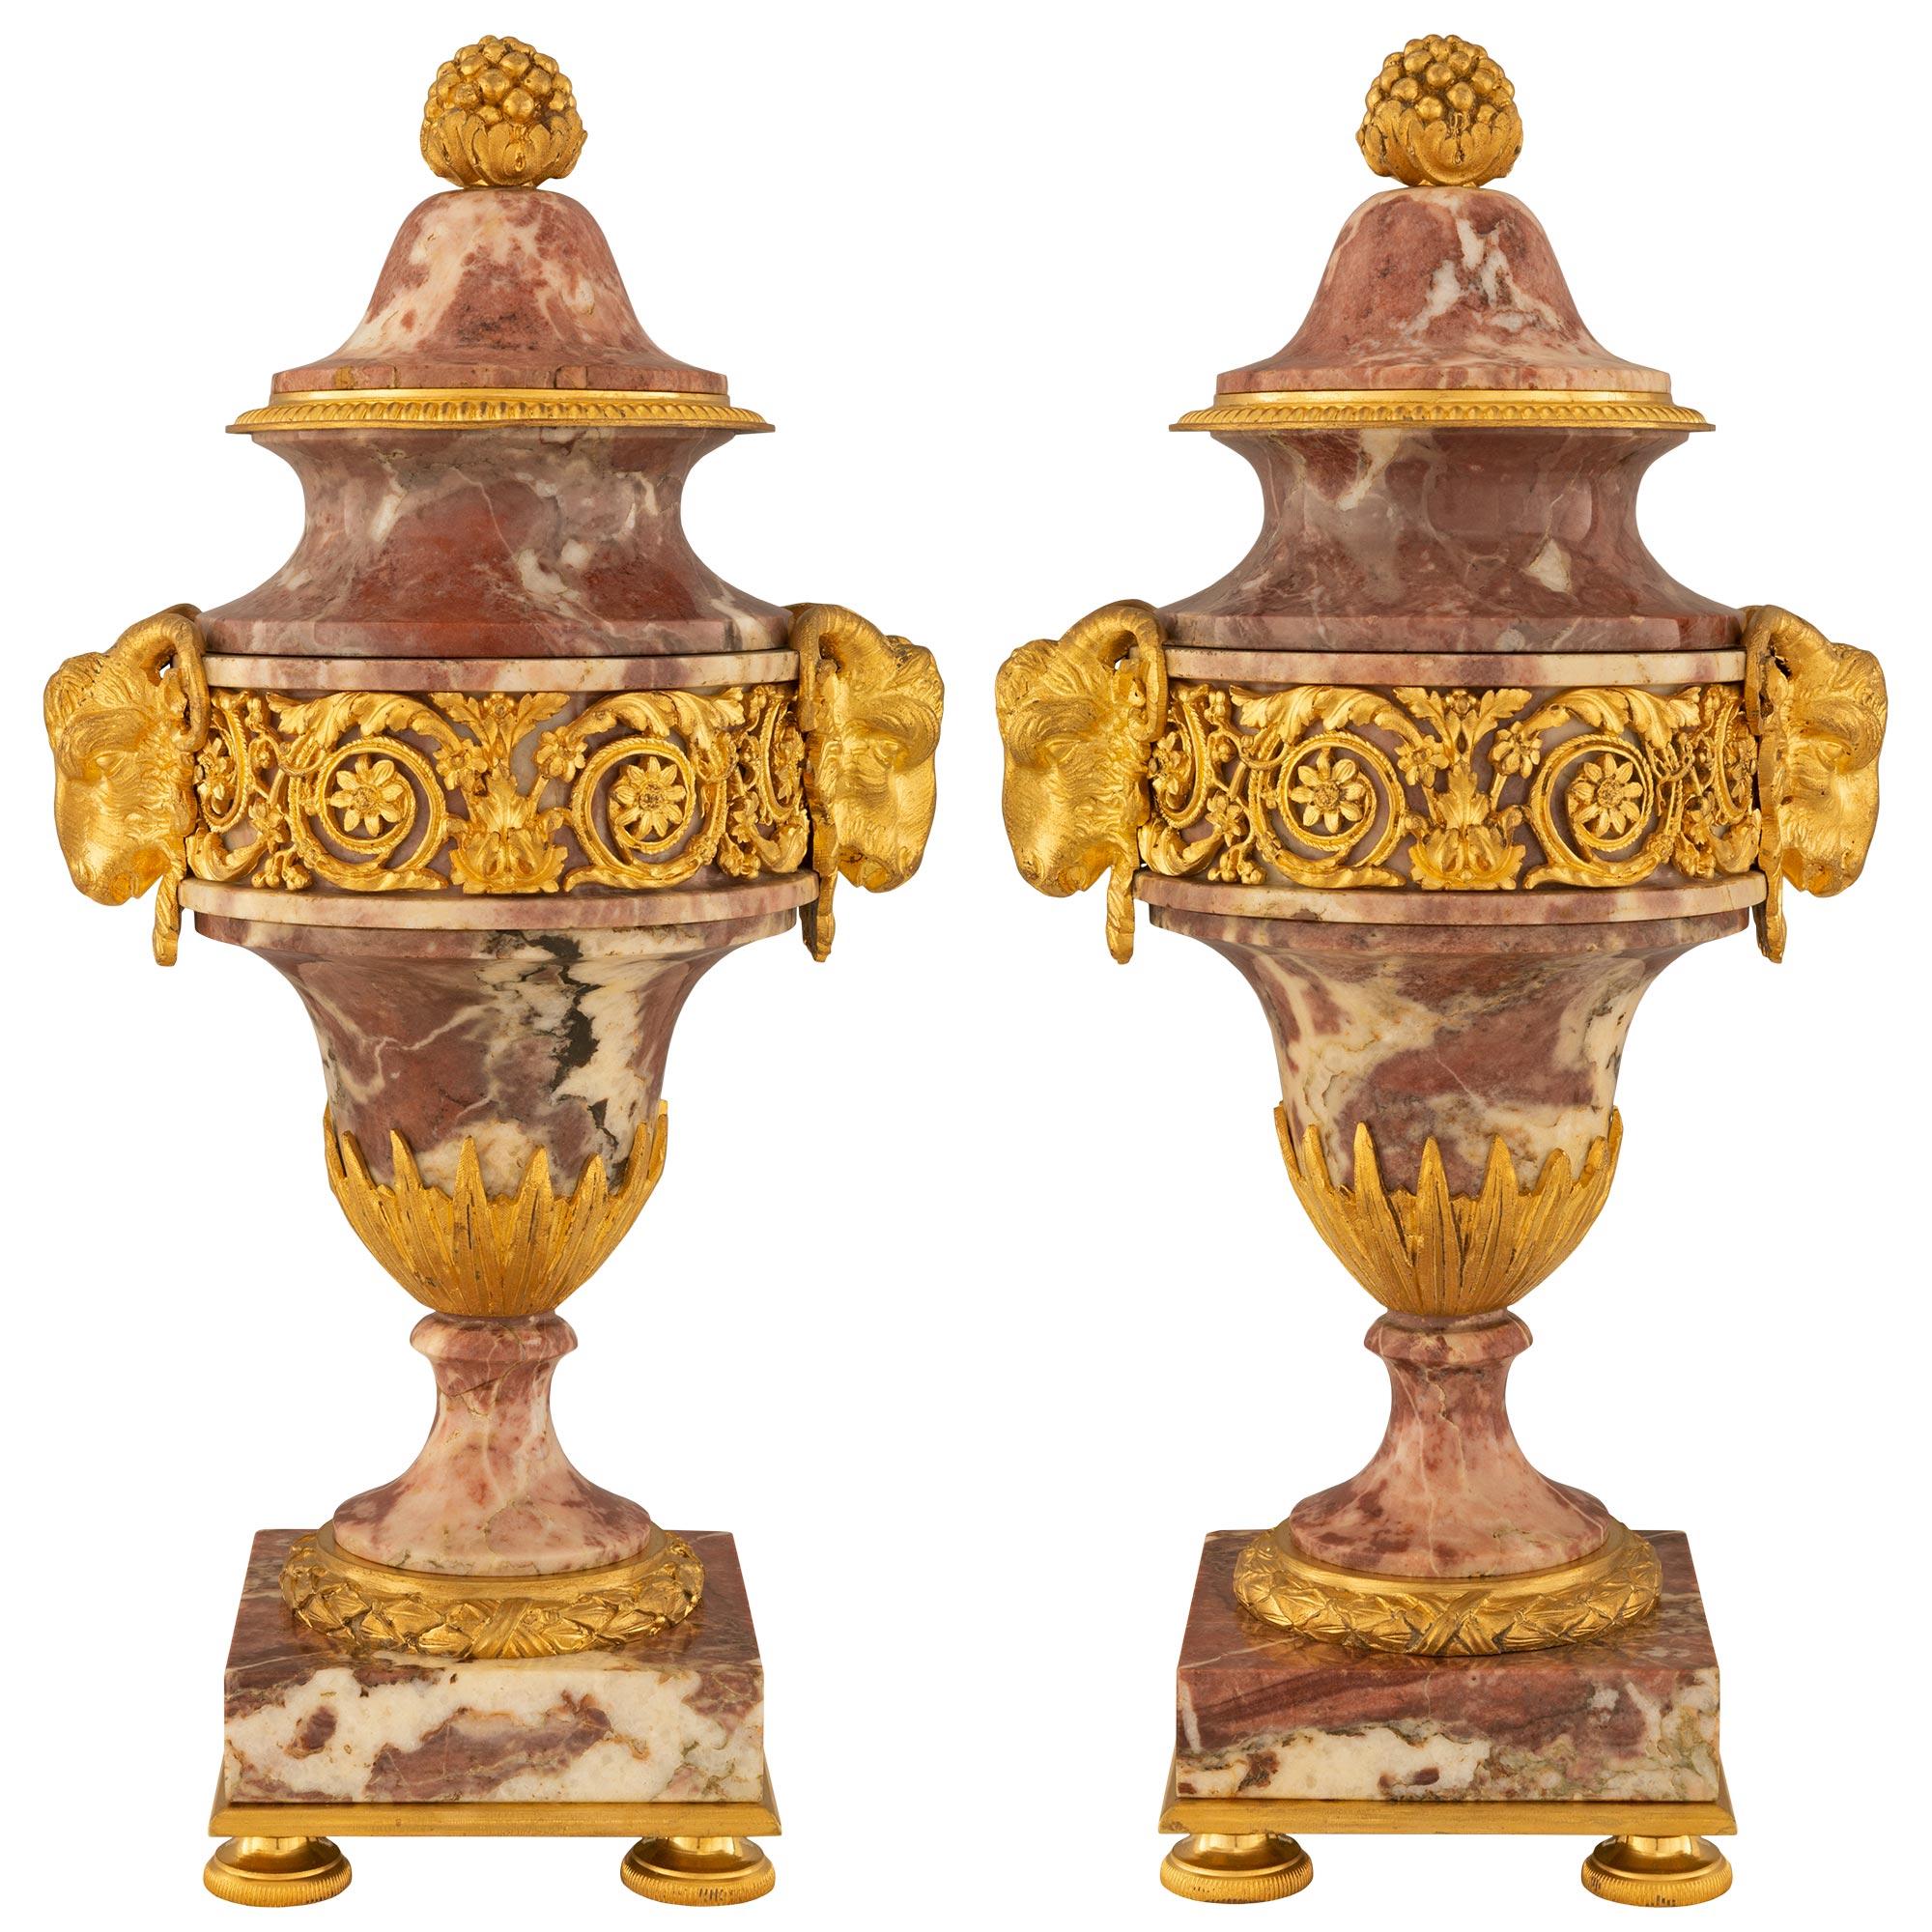 Pair of French 19th Century Louis XVI St. Brèche Violette Marble and Ormolu Urns For Sale 7